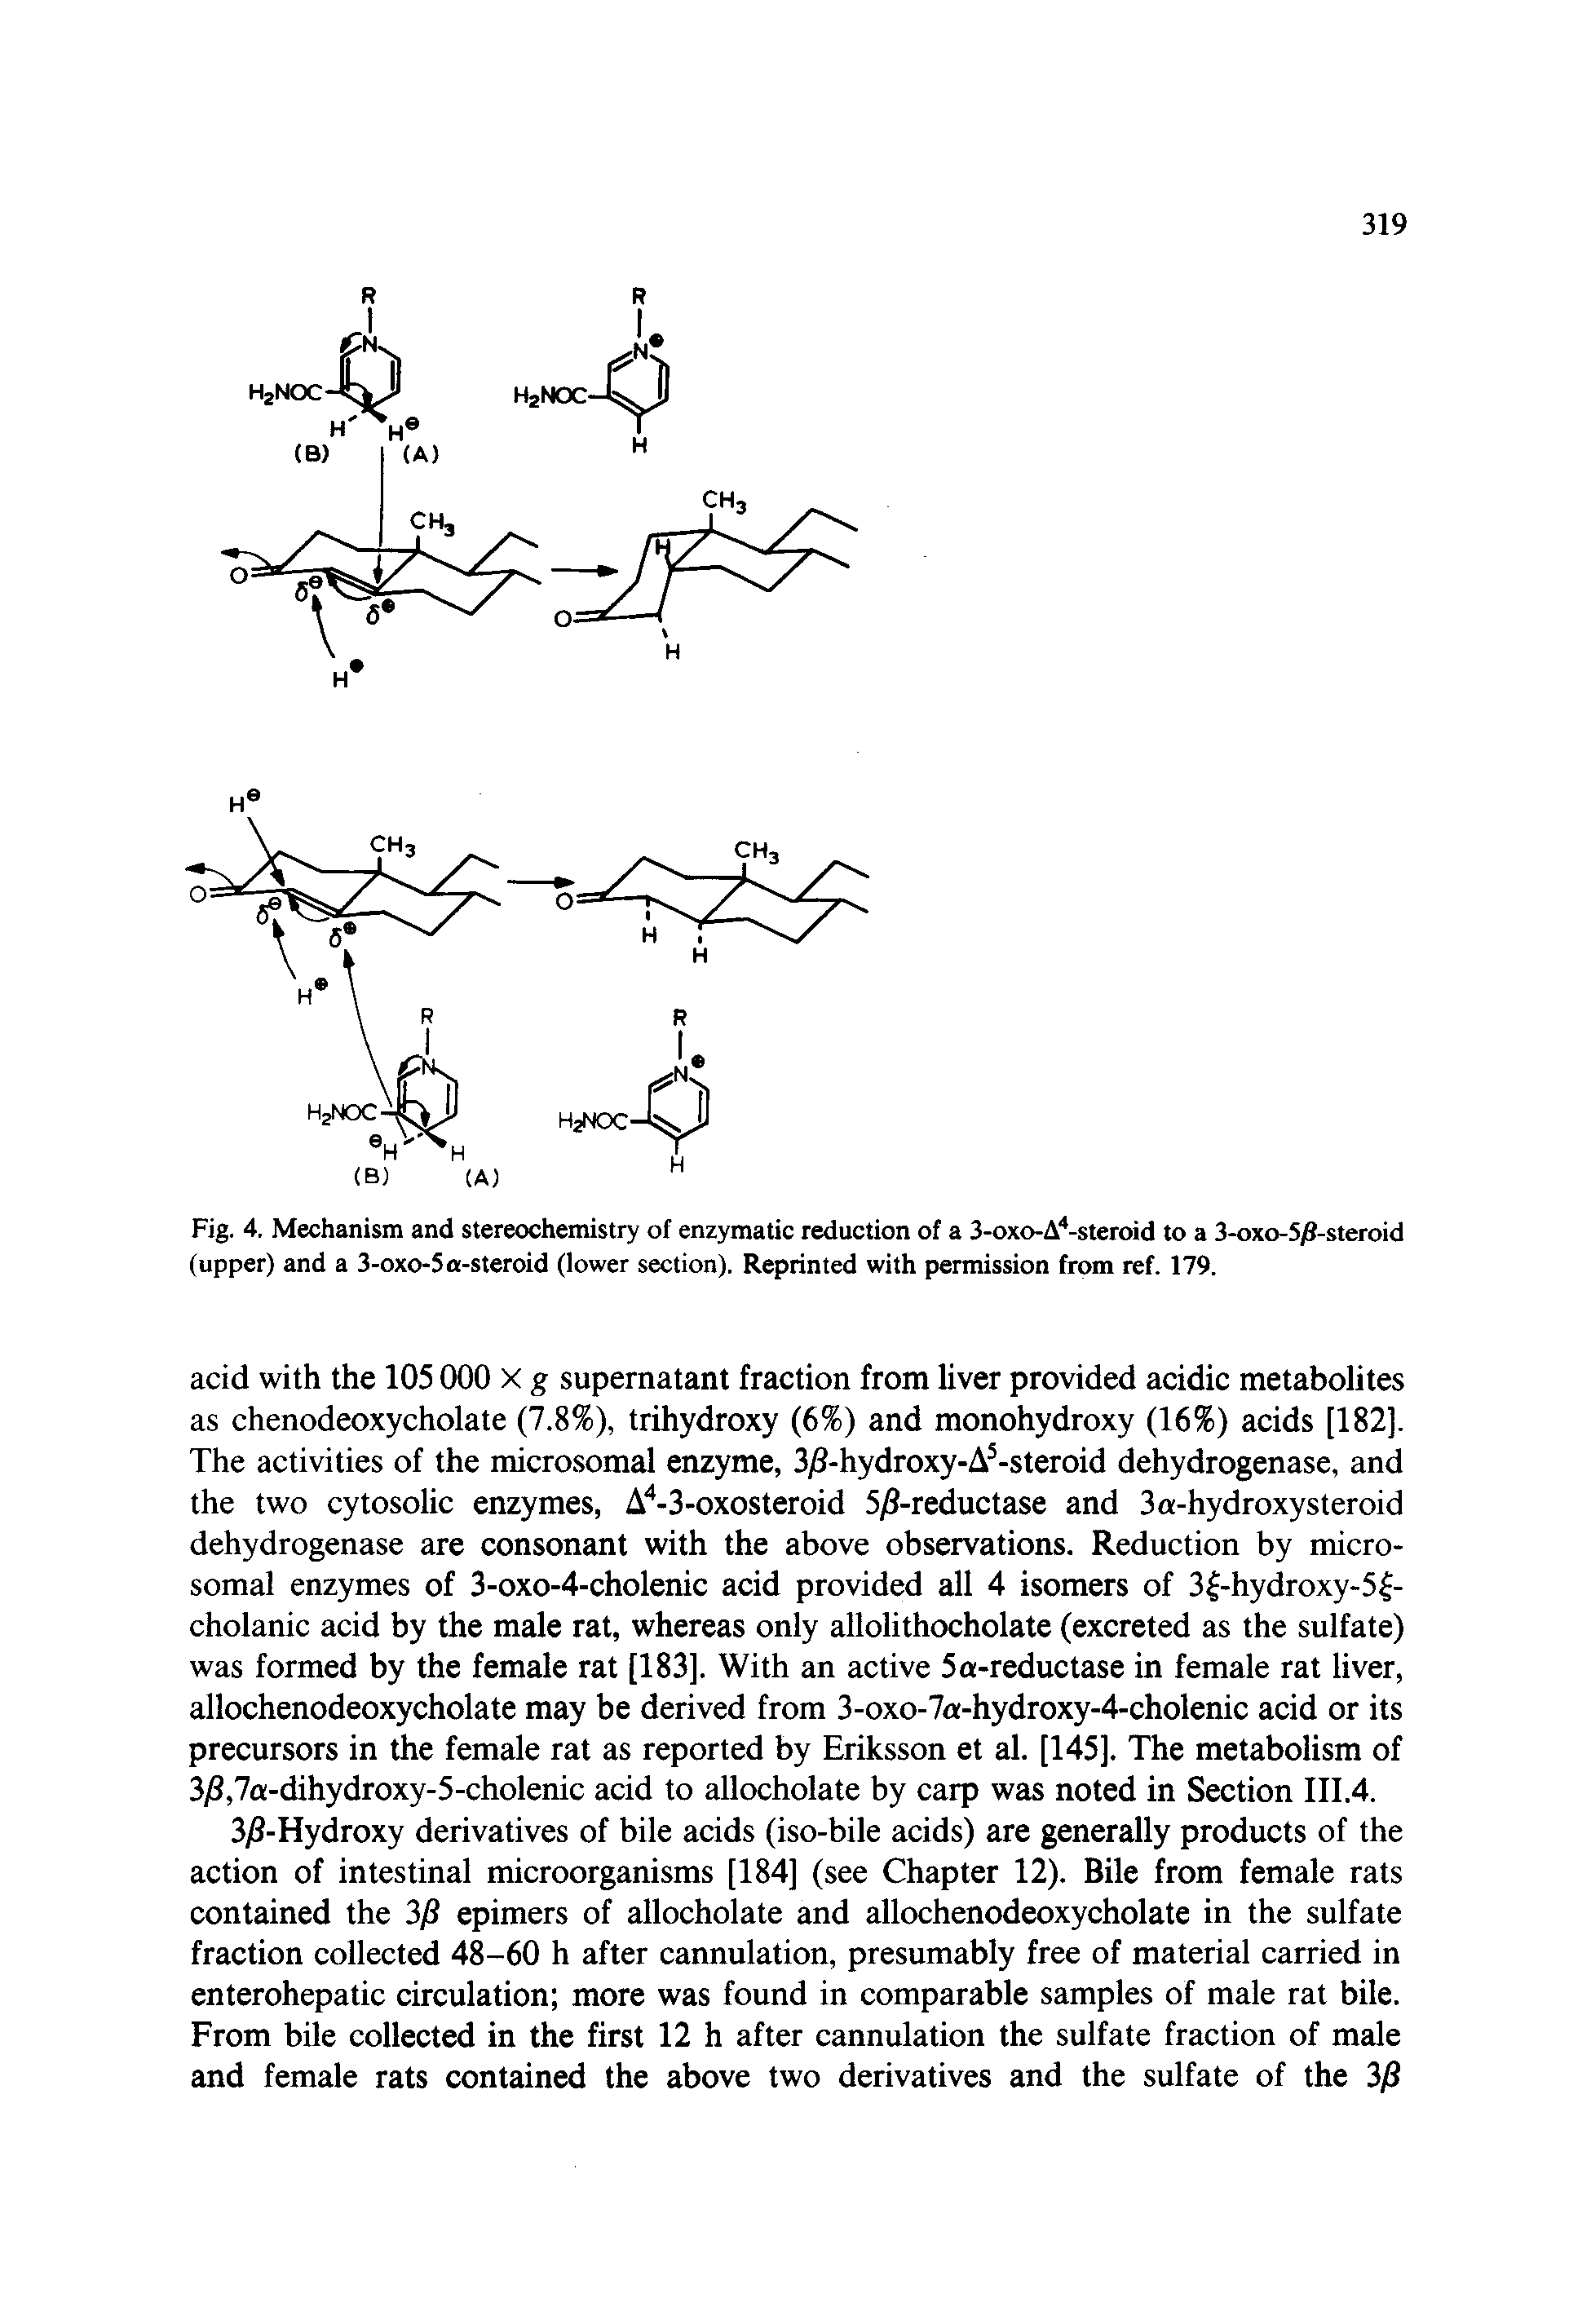 Fig. 4. Mechanism and stereochemistry of enzymatic reduction of a 3-oxo-A -steroid to a 3-oxo-5 8-steroid (upper) and a 3-oxo-5a-steroid (lower section). Reprinted with permission from ref. 179.